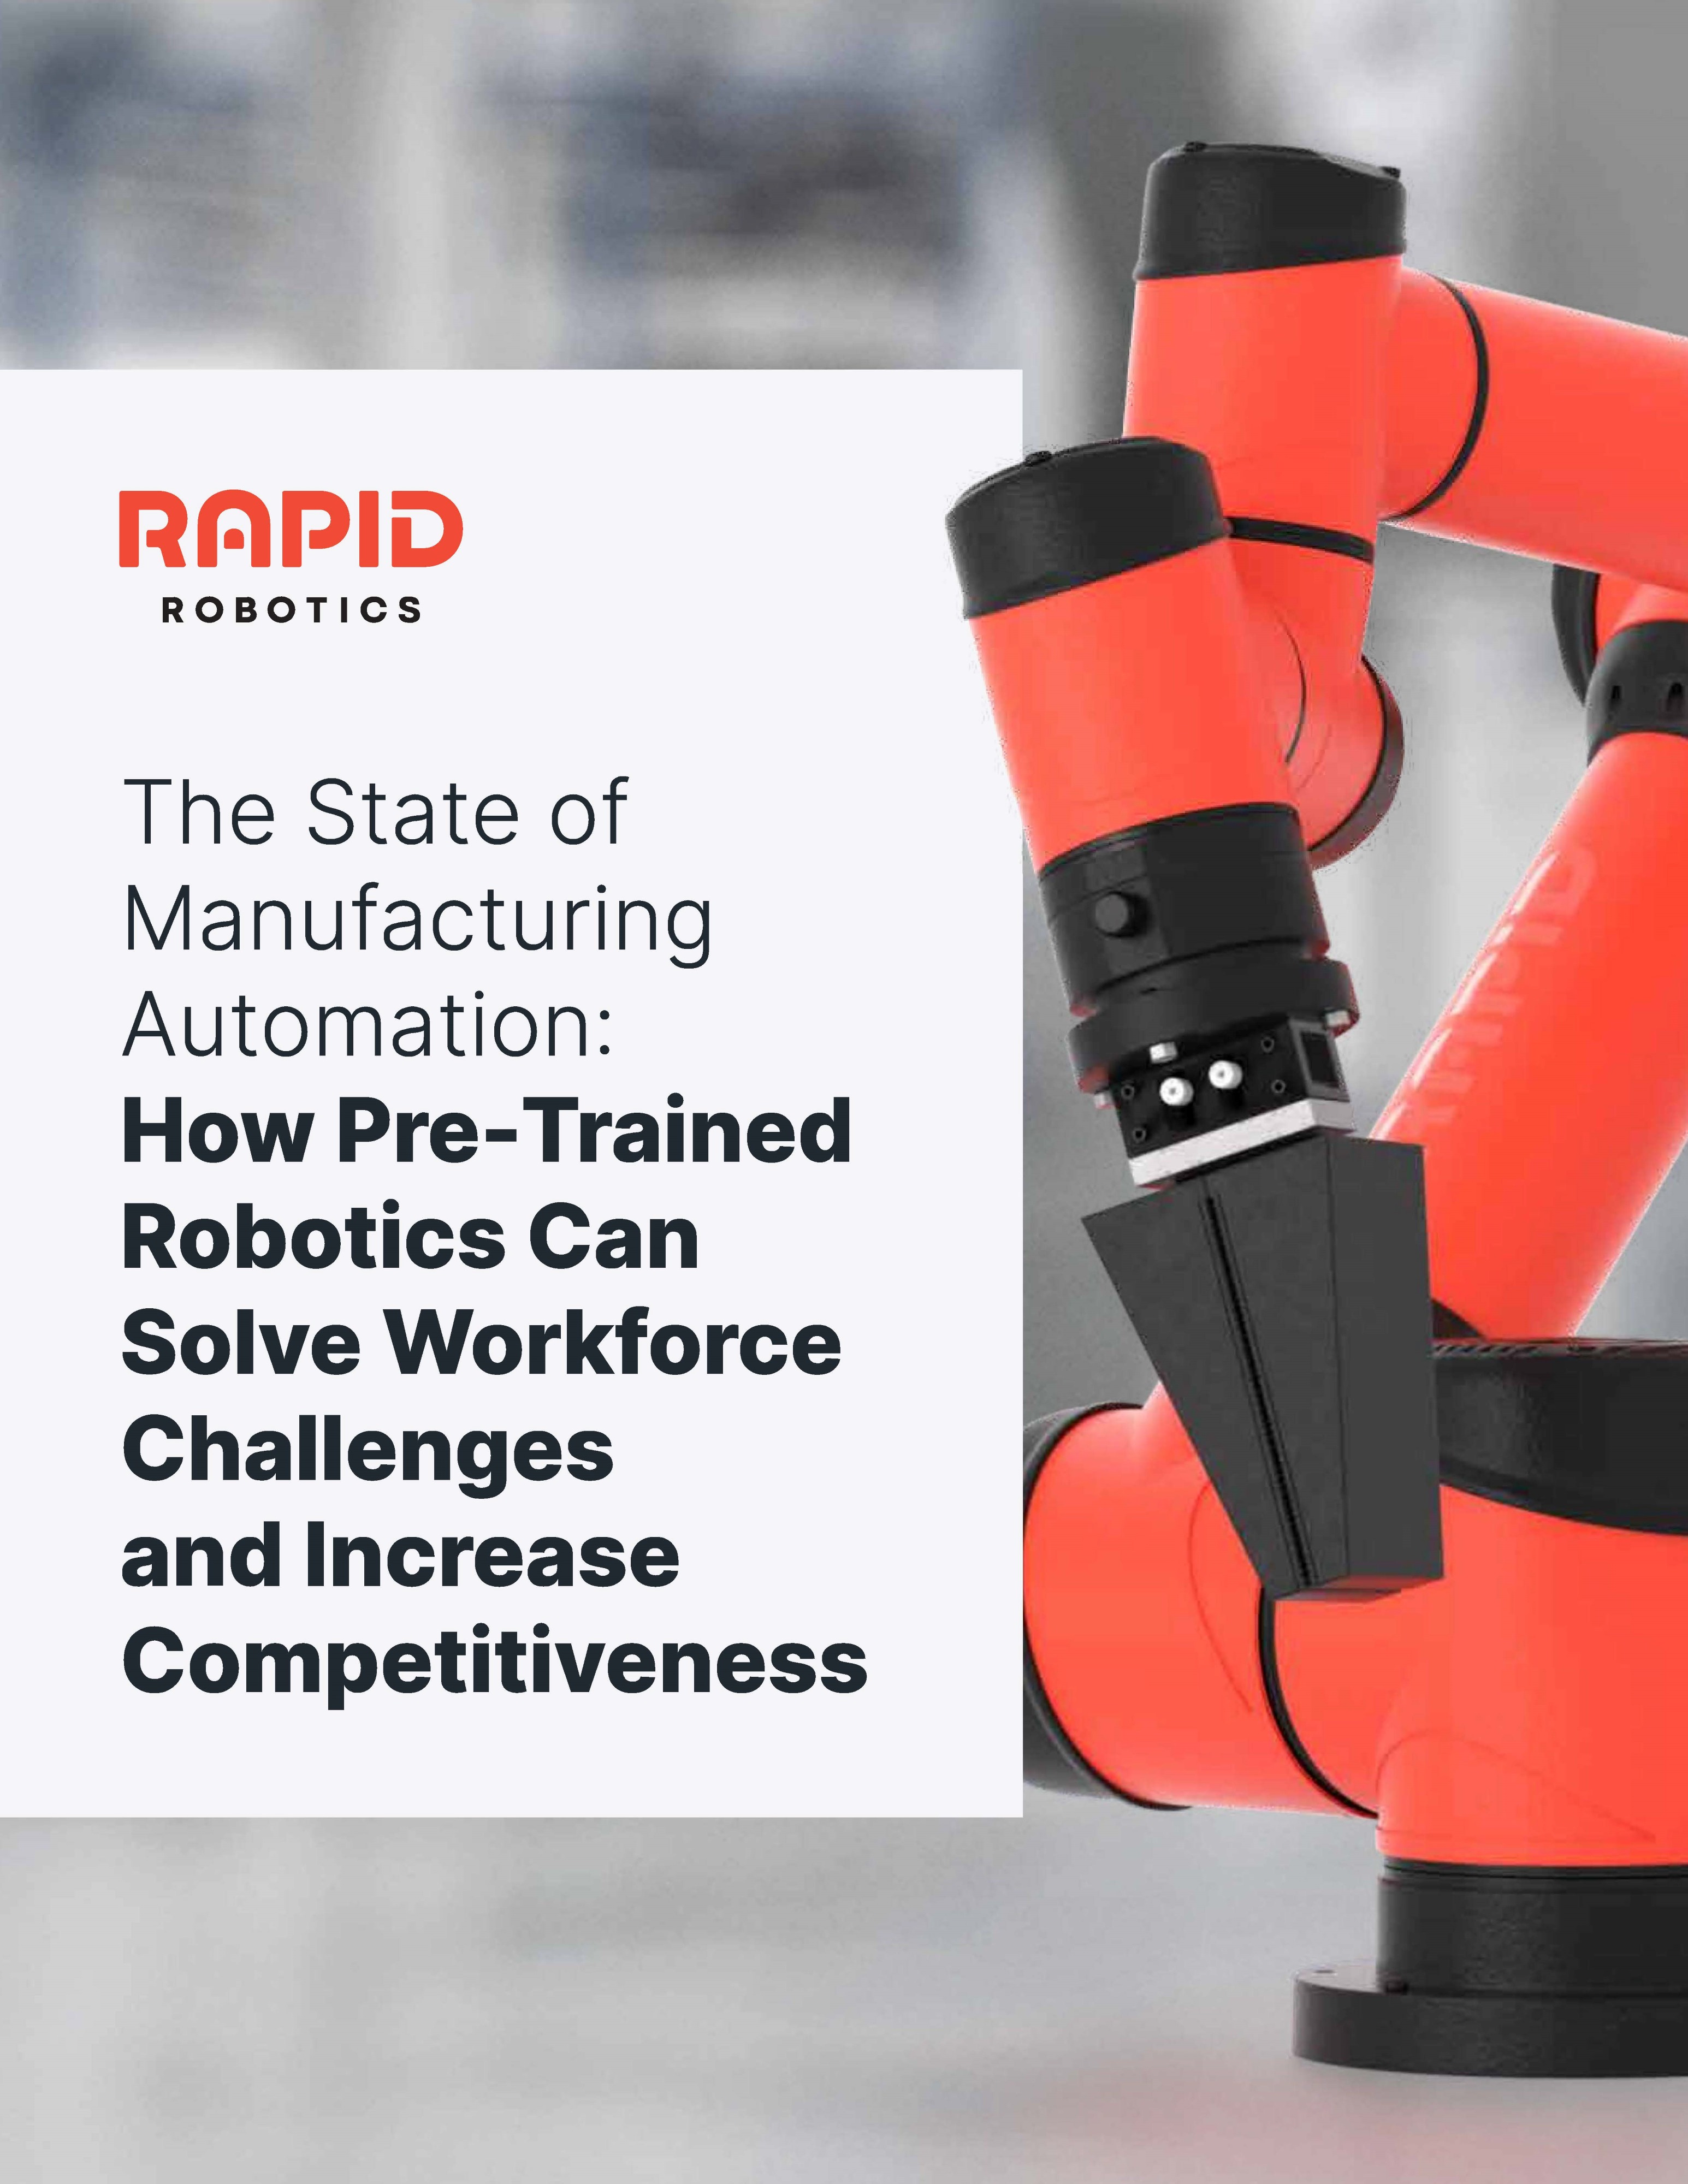 The State of Manufacturing Automation: How Pre-Trained Robotics Can Solve Workforce Challenges and Increase Competitiveness report cover page, showing an orange robot with a black claw gripper.